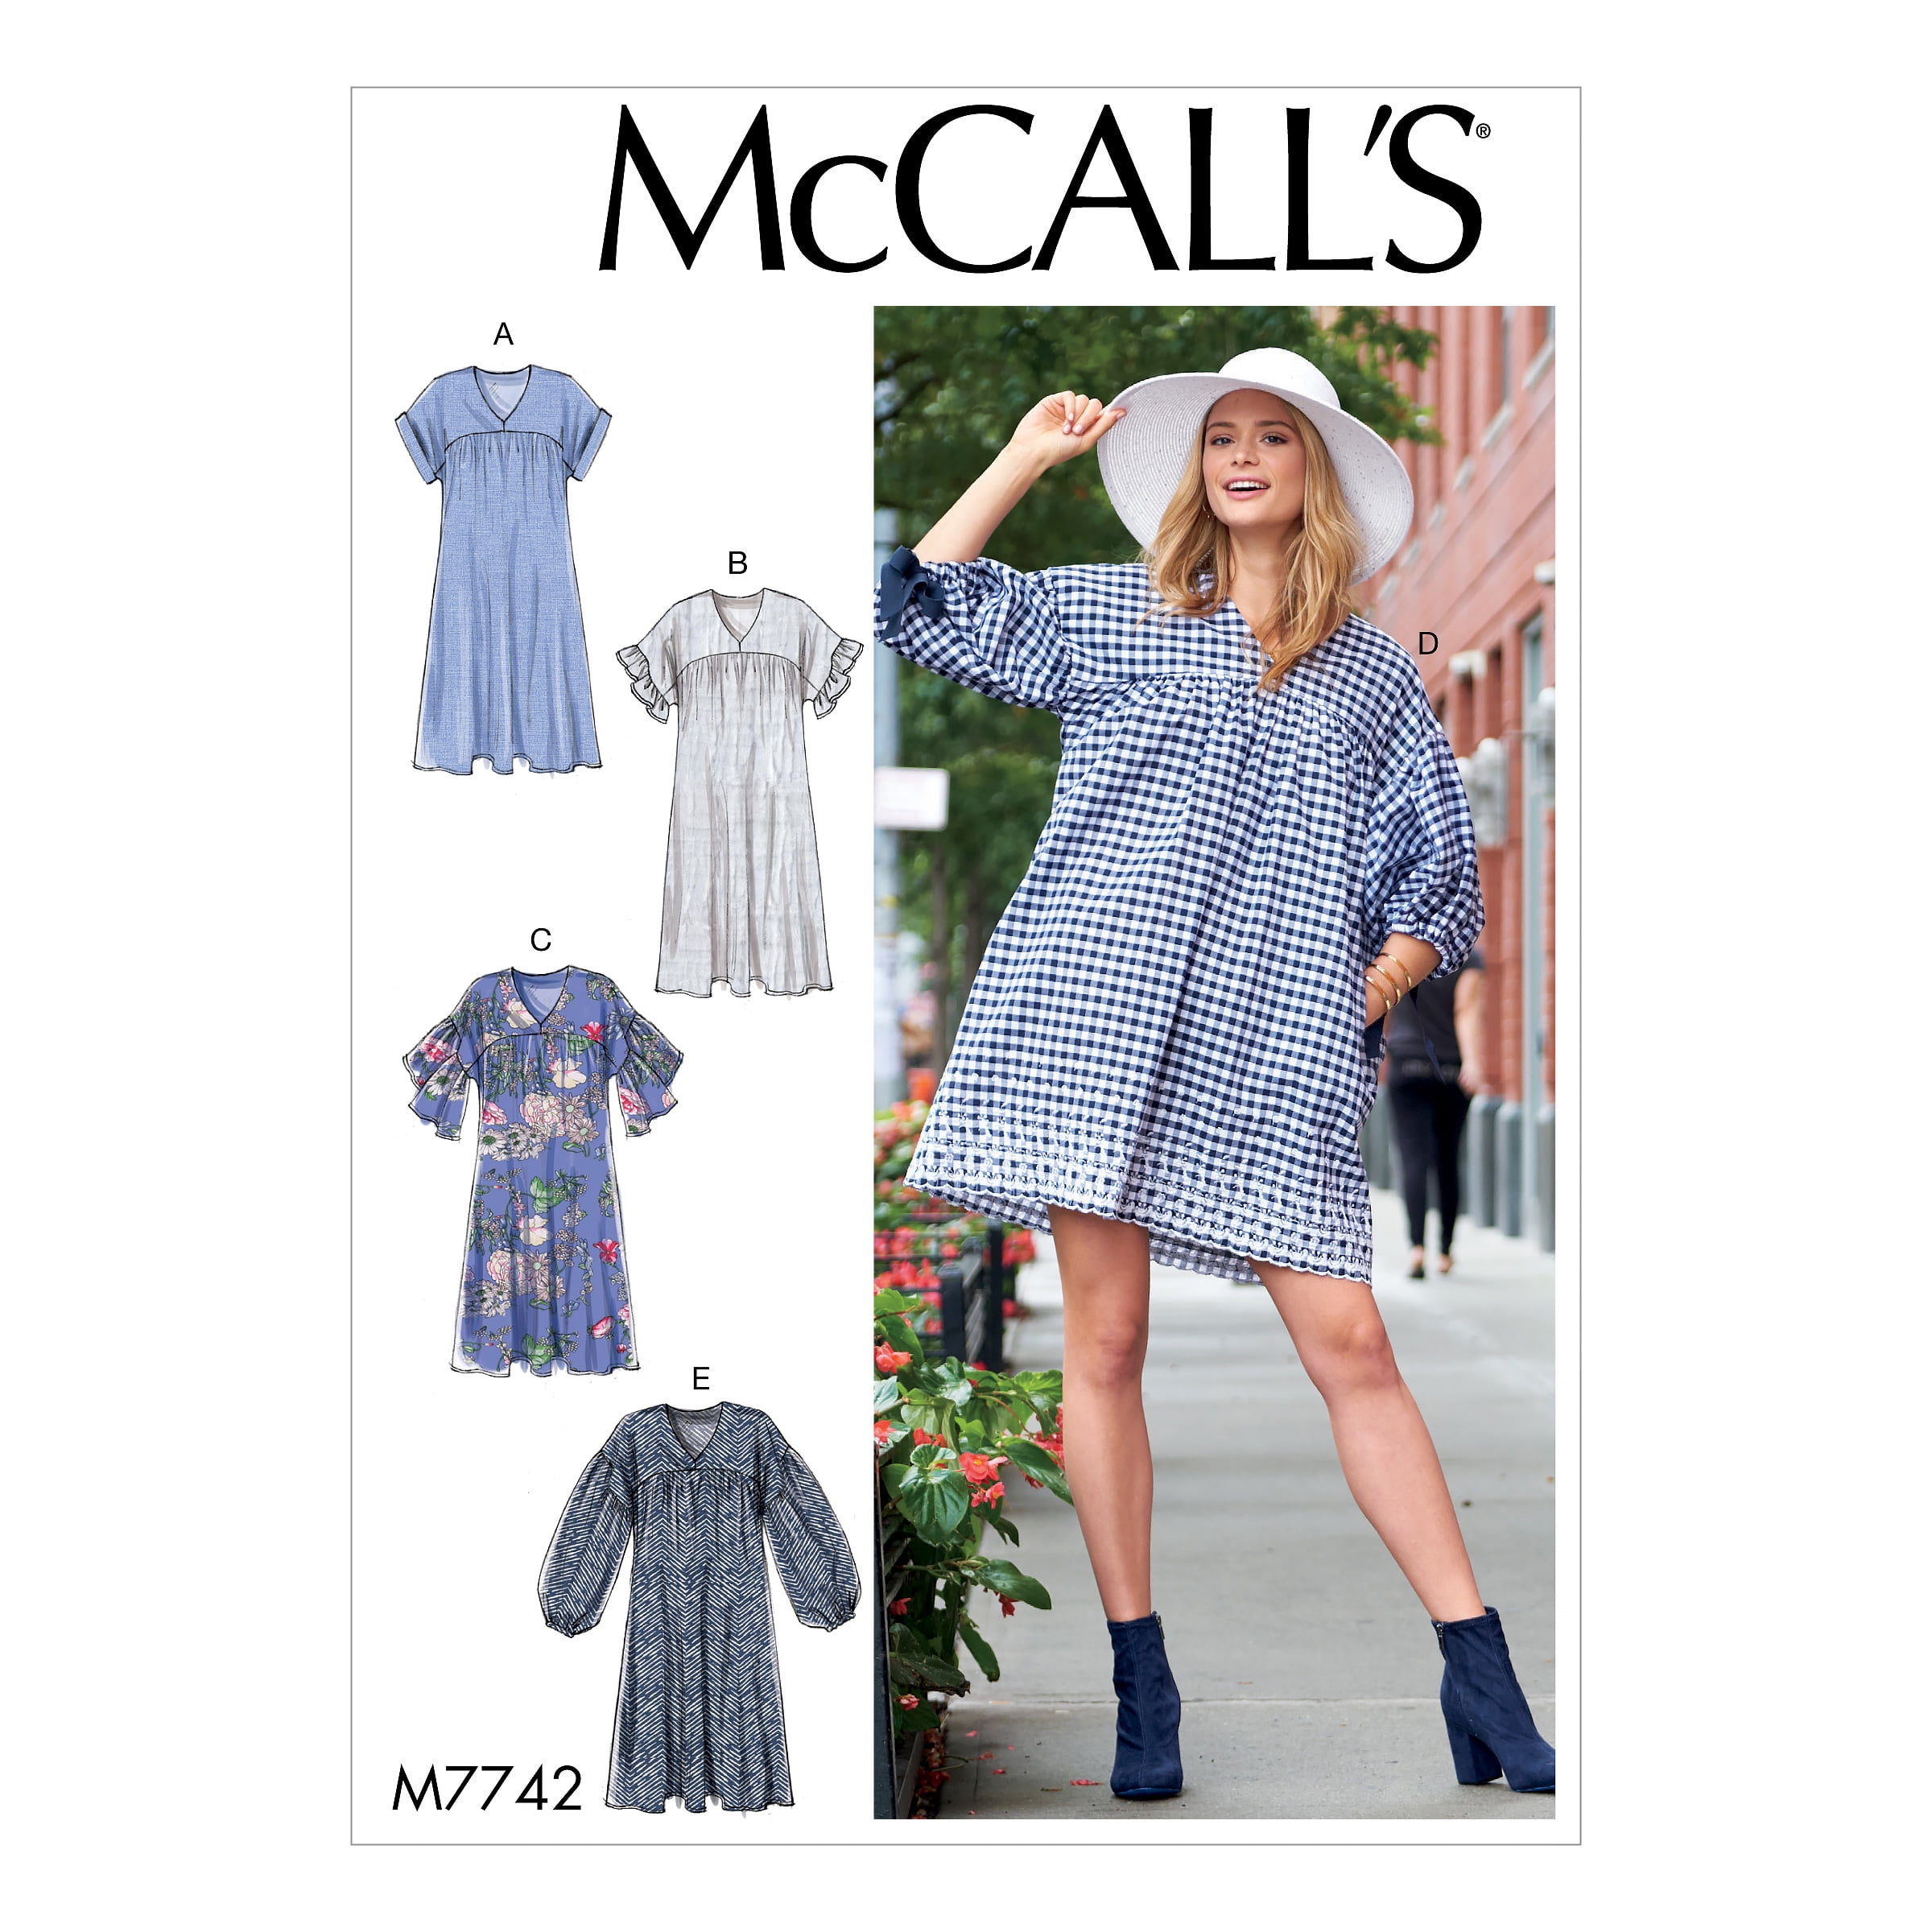 McCall's Misses' and Children's Dress Sewing Pattern Kit, Code M8216, Sizes 3-8 /XS-XL, Multicolor